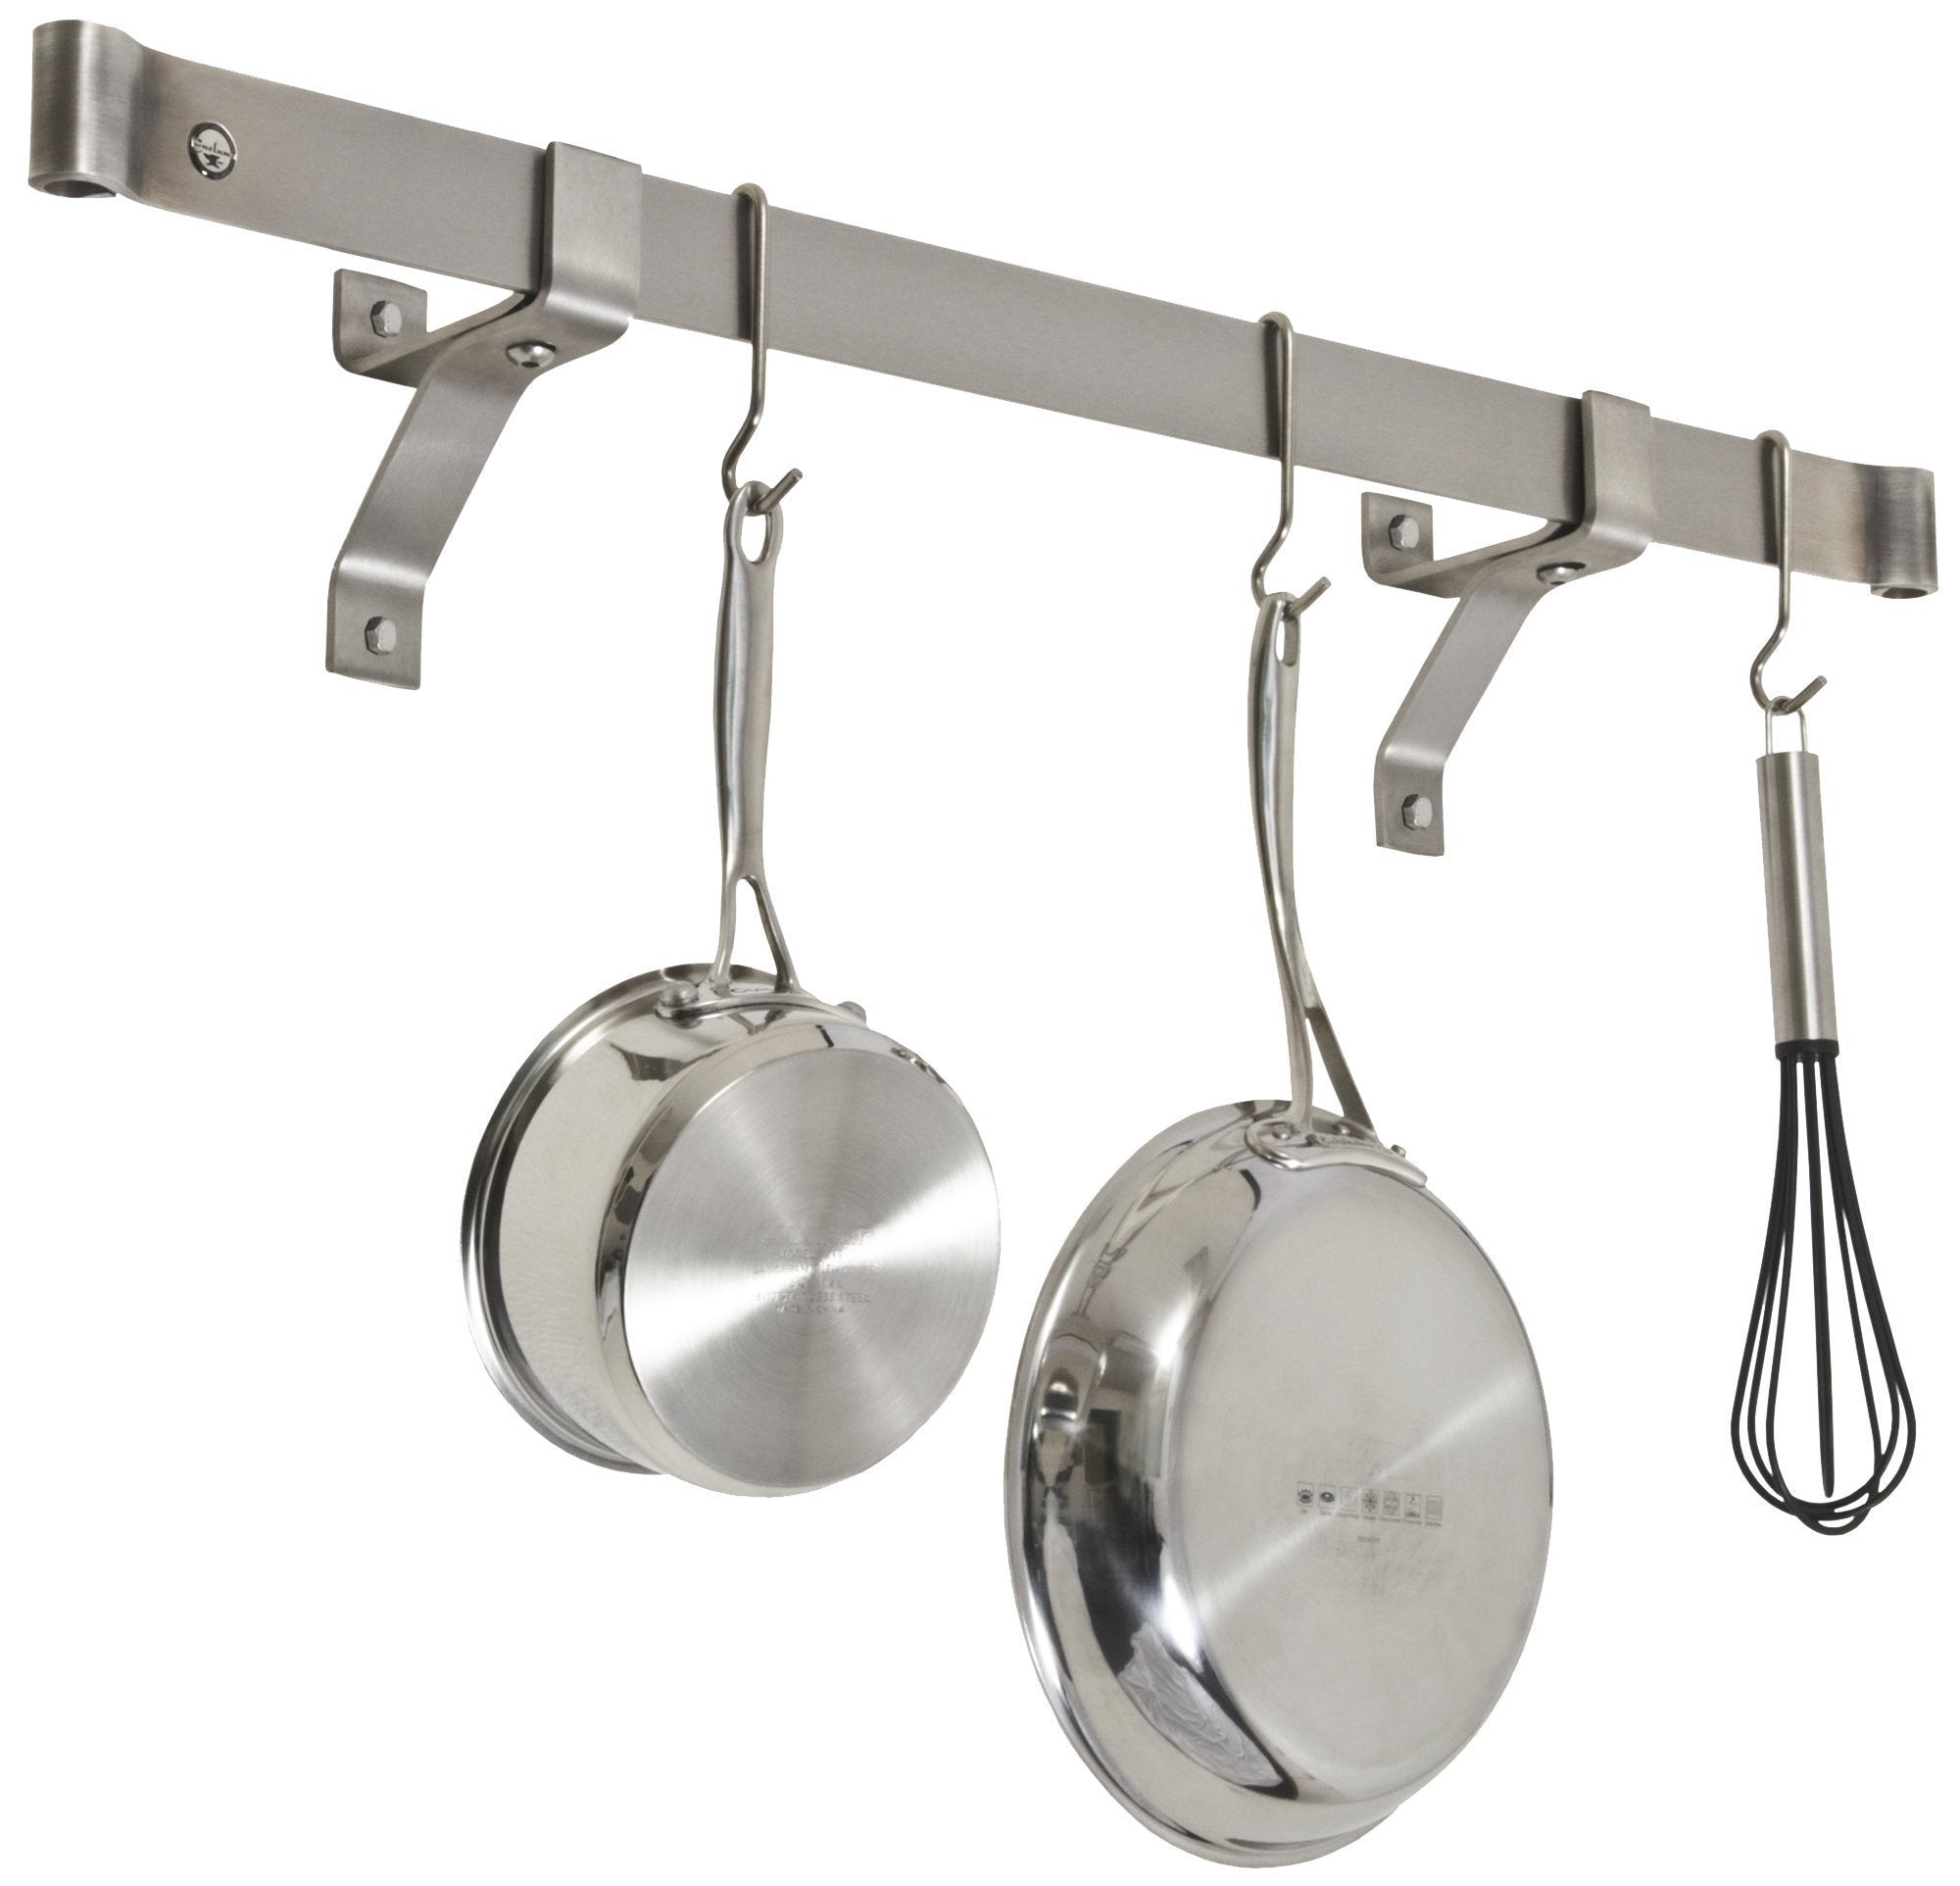 Enclume Premier 36-Inch Rolled End Bar, Wall or Ceiling, Pot Rack, Use with Wall Brackets or Captain Hooks, Stainless Steel